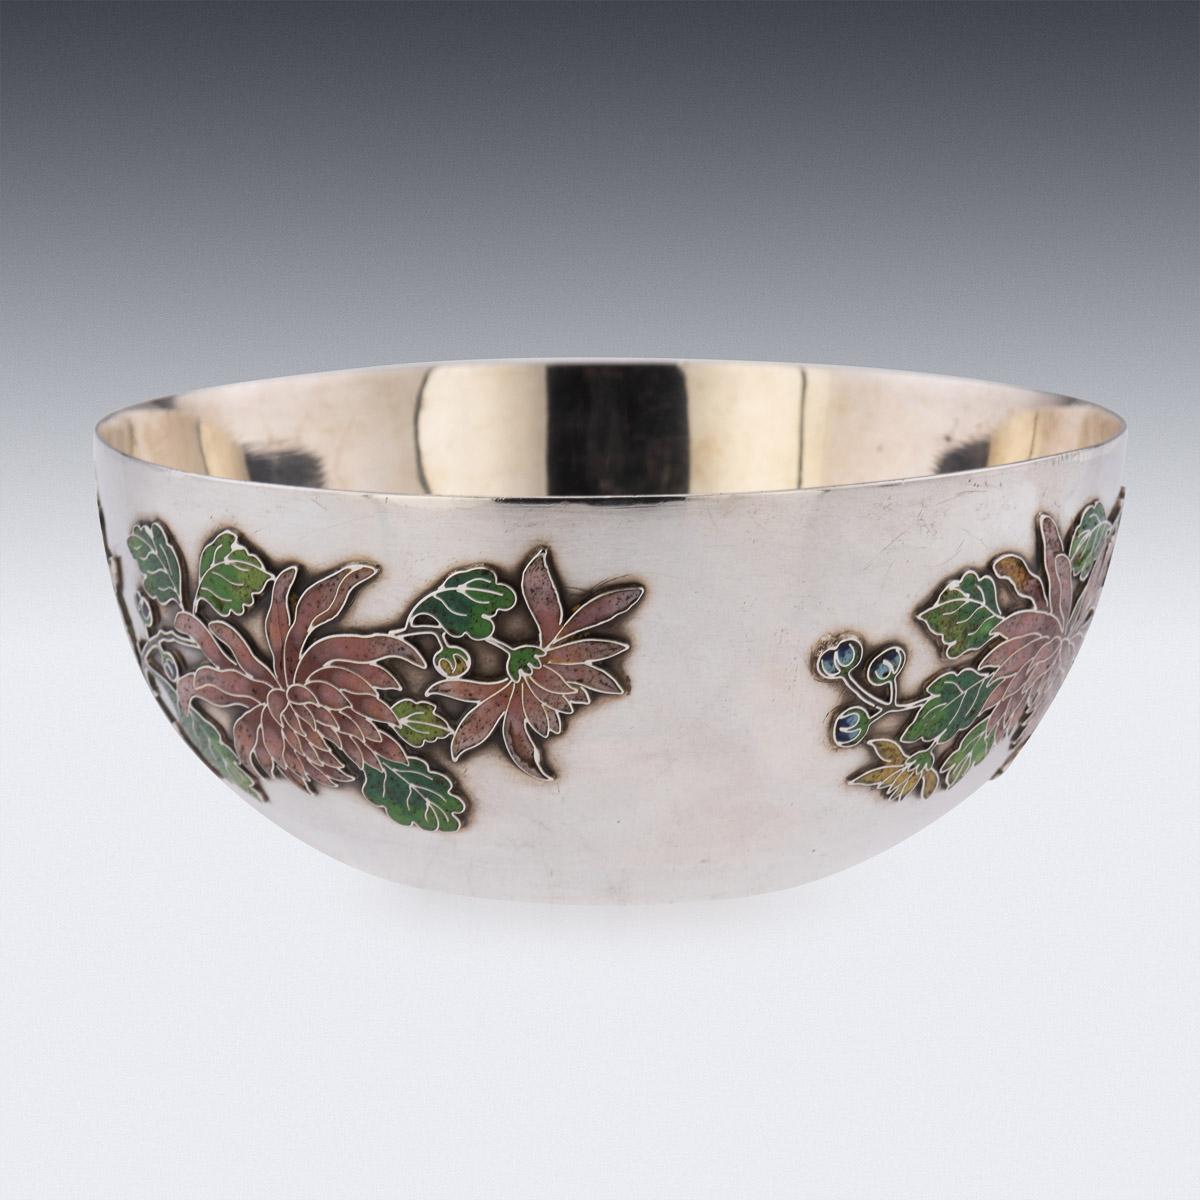 19th Century Rare Chinese Export Solid Silver & Enamel Bowl, Wang Hing, c.1890 For Sale 1